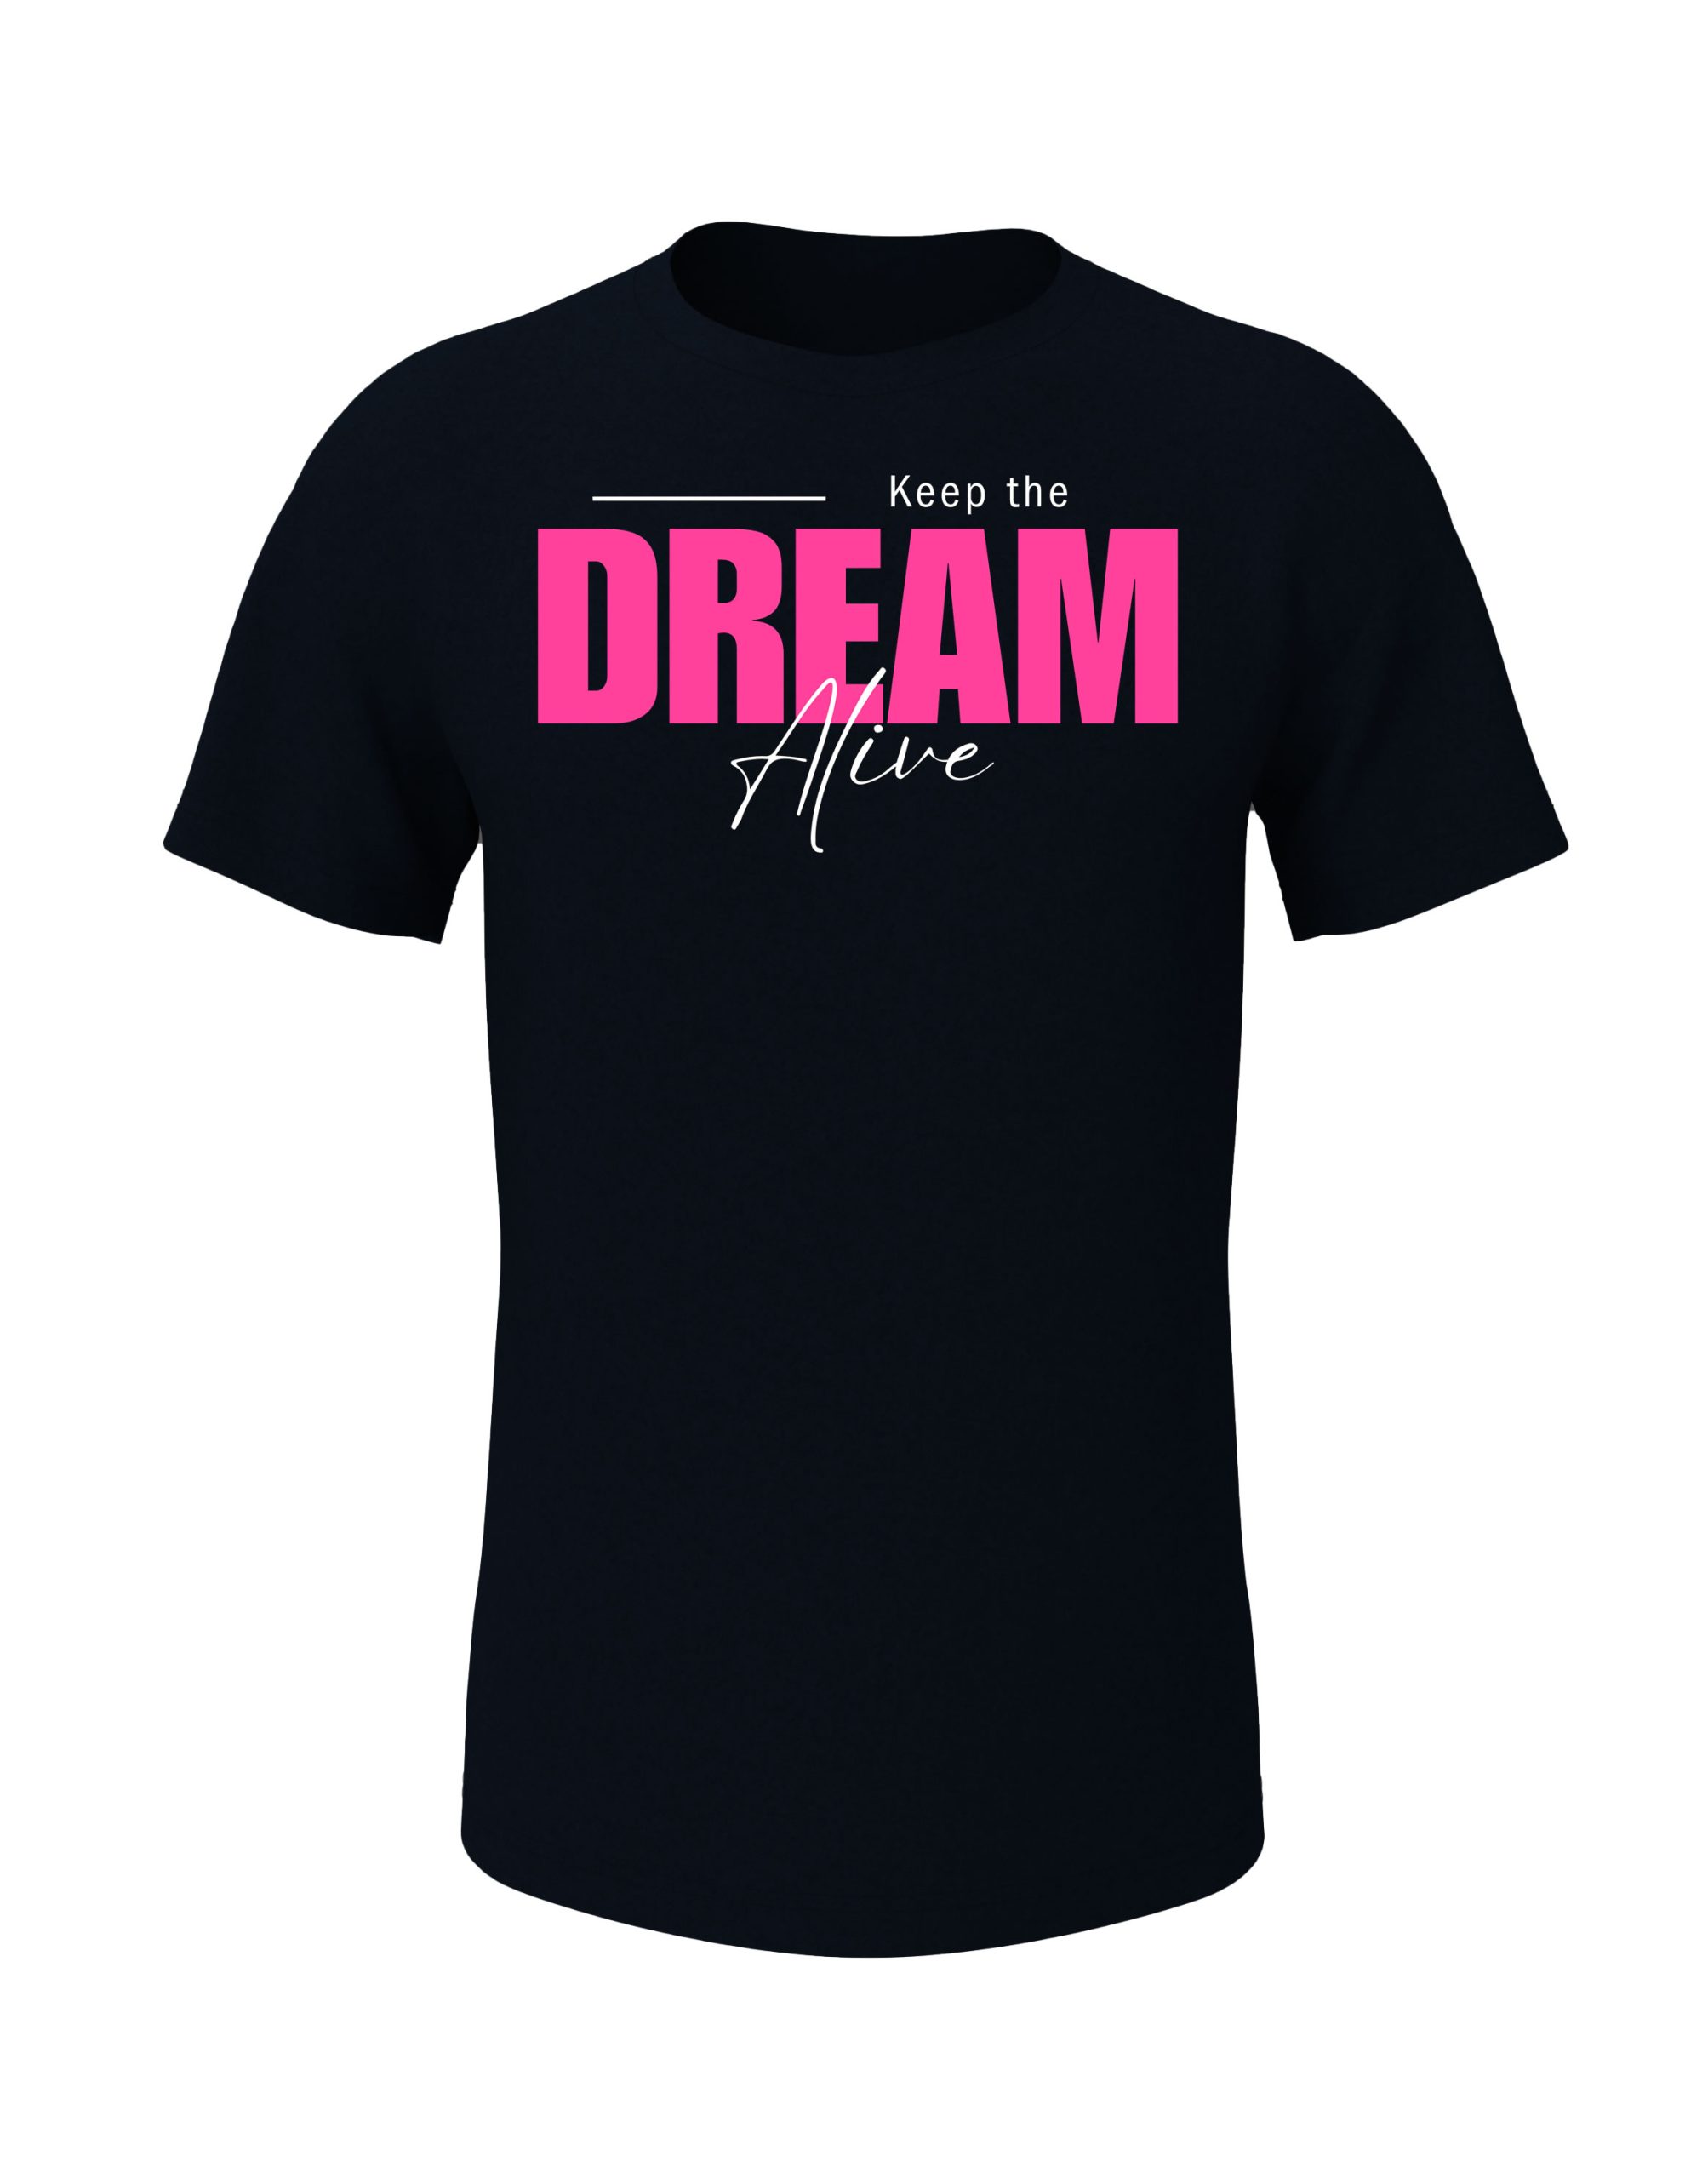 T-Shirt: Keep The Dream Alive